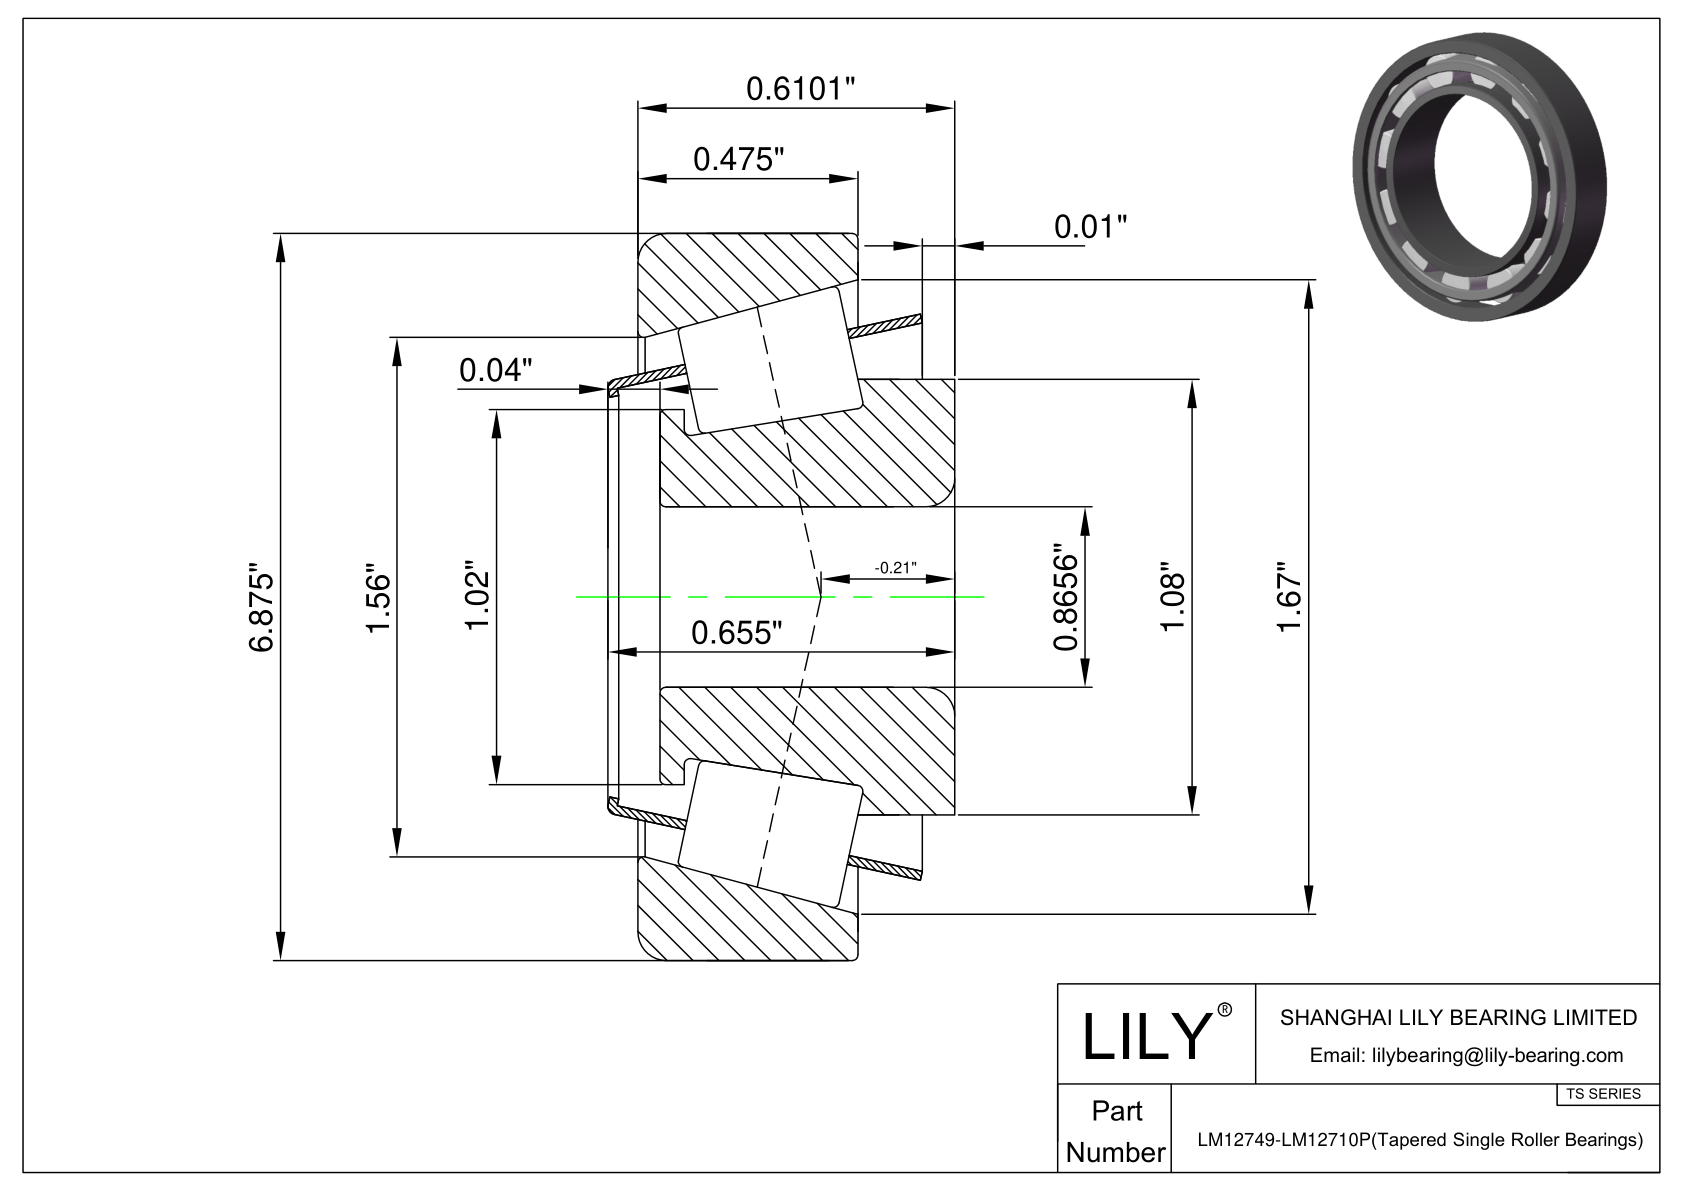 LM12749-LM12710P TS (Tapered Single Roller Bearings) (Imperial) cad drawing